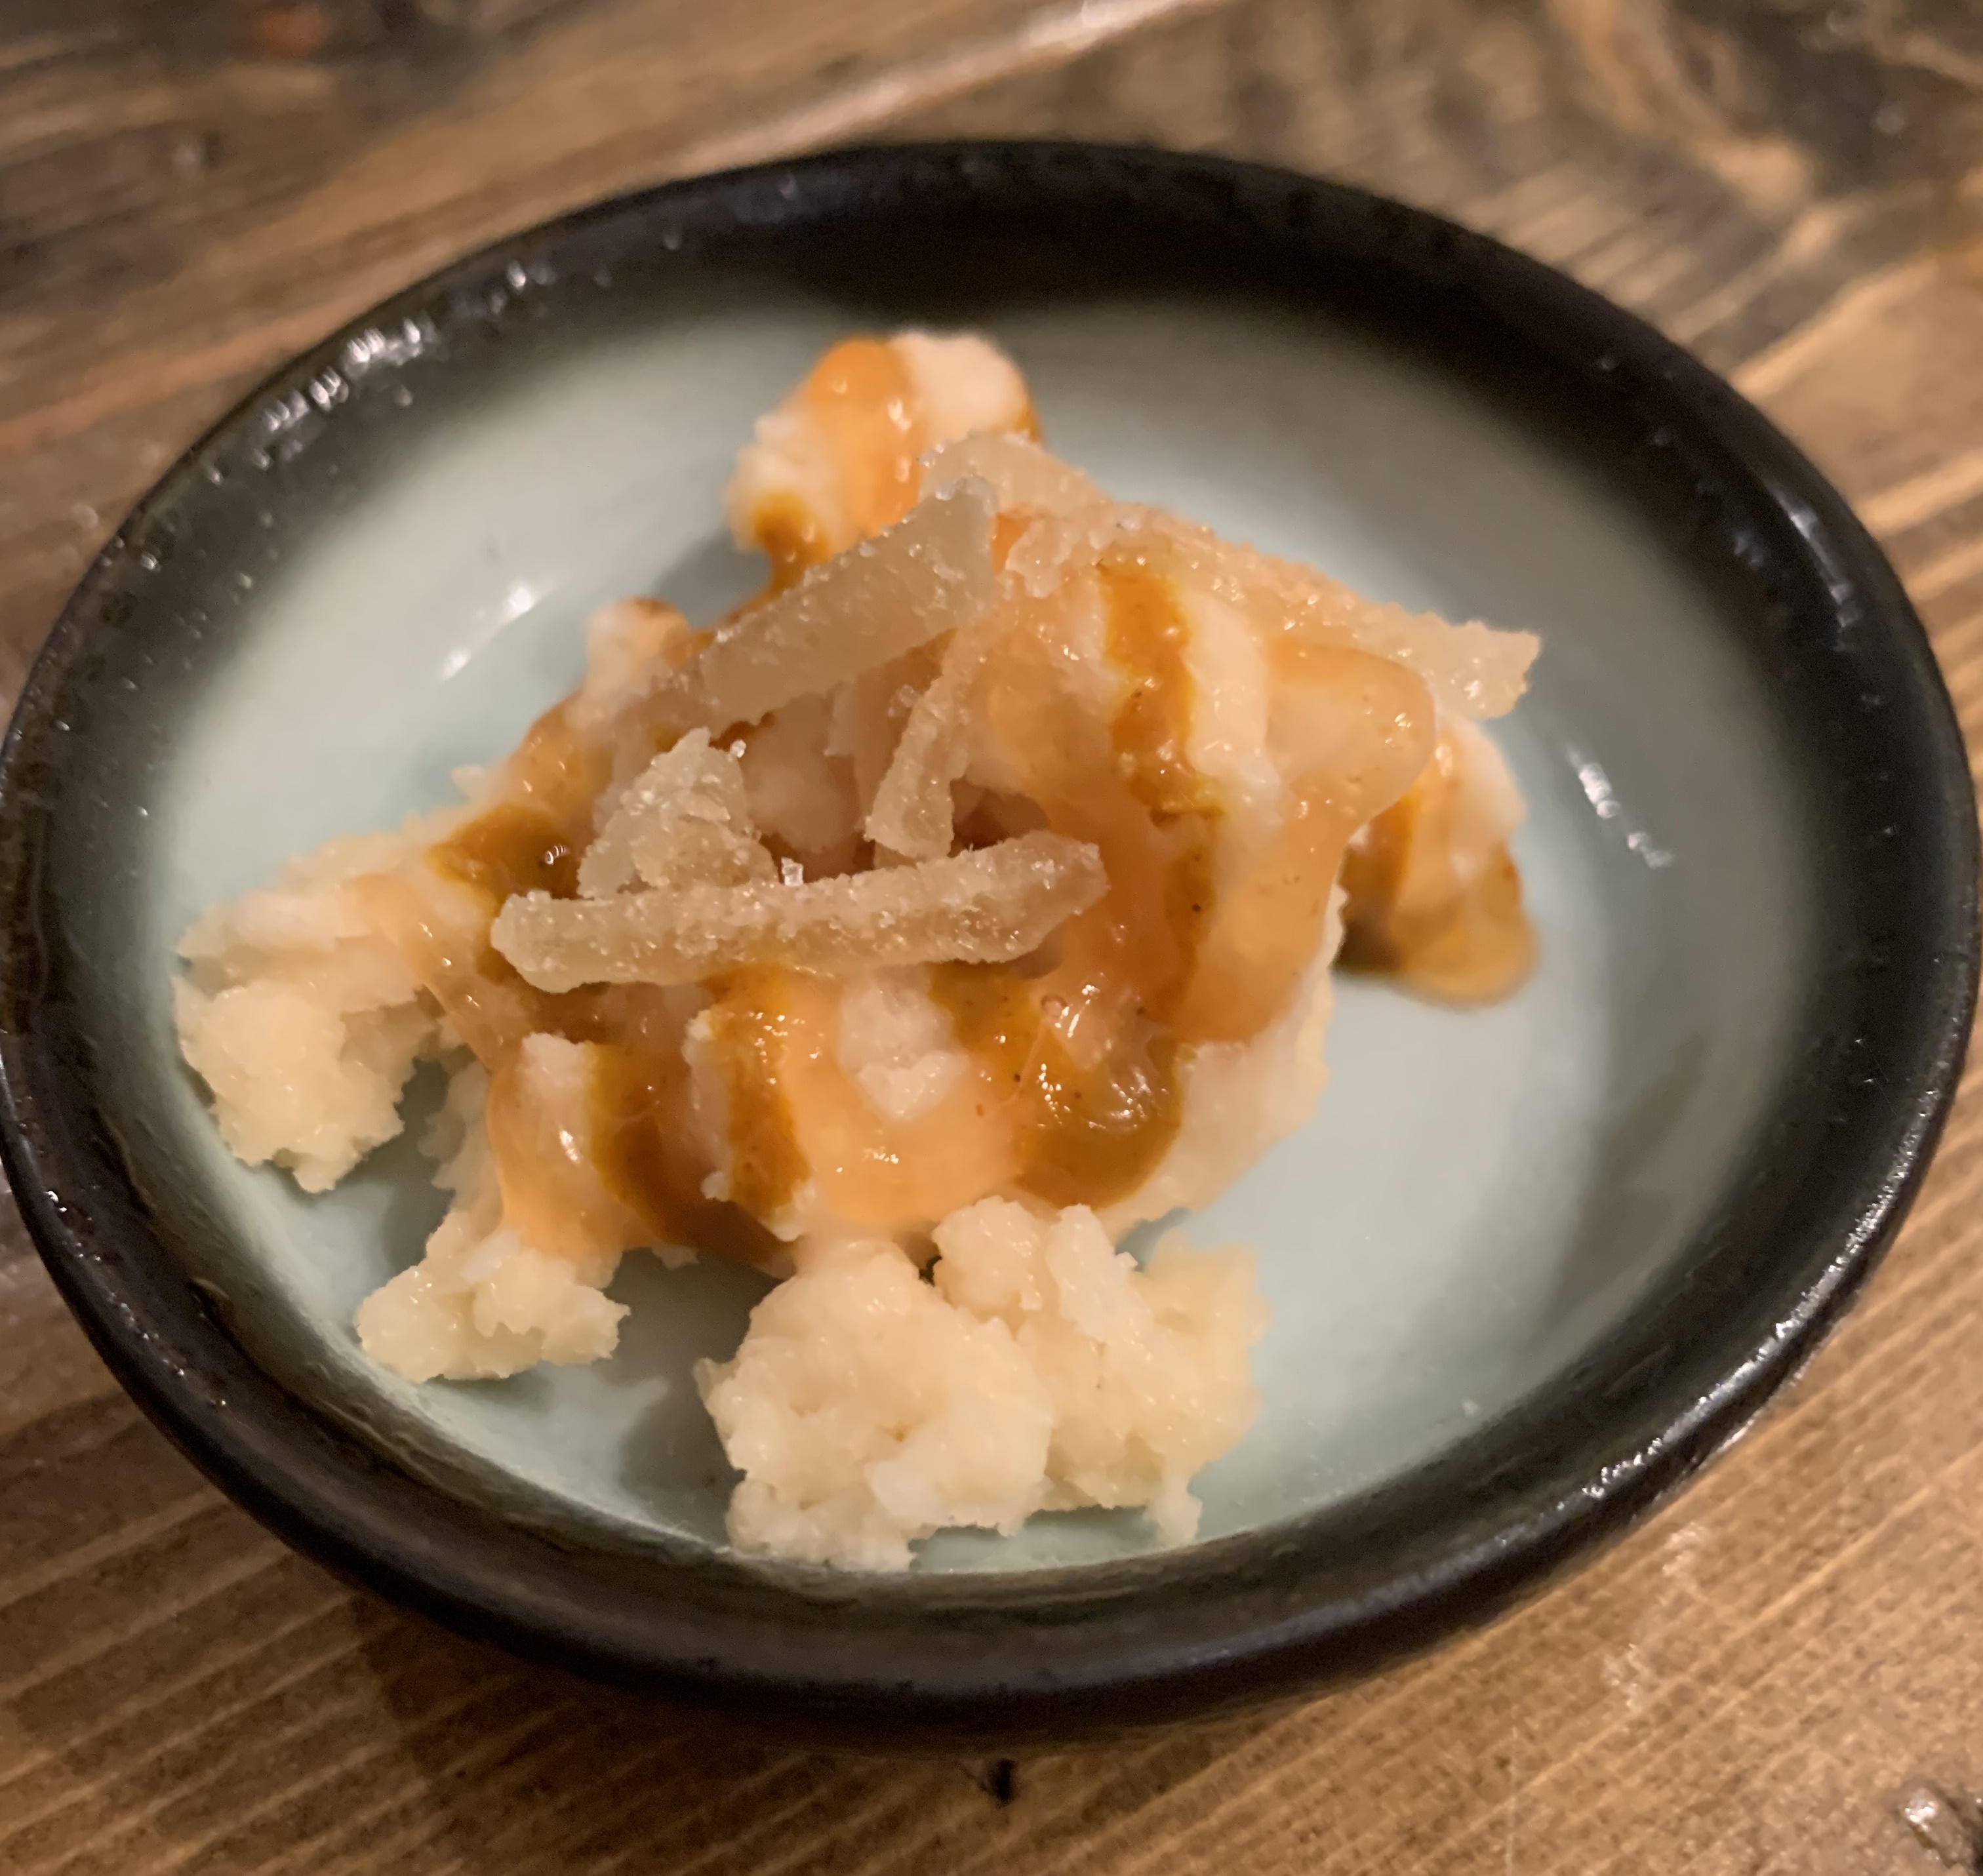 Tiny bowl of shaved ice, with some bits of crystalized ginger and an orange sauce